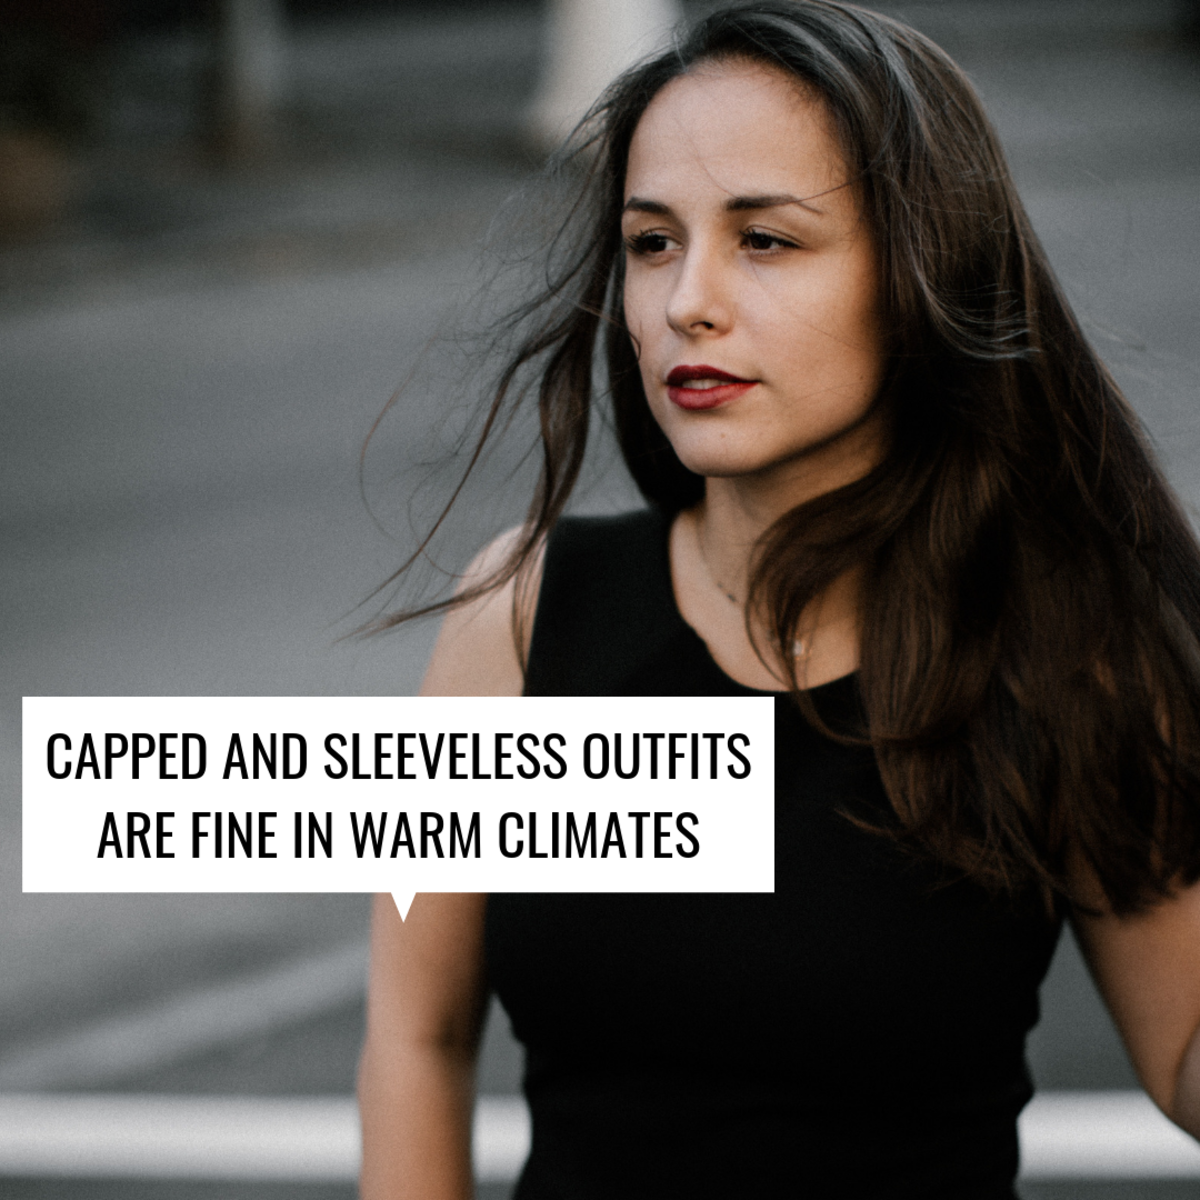 Capped and short-sleeved outfits are acceptable, especially for warmer climates.